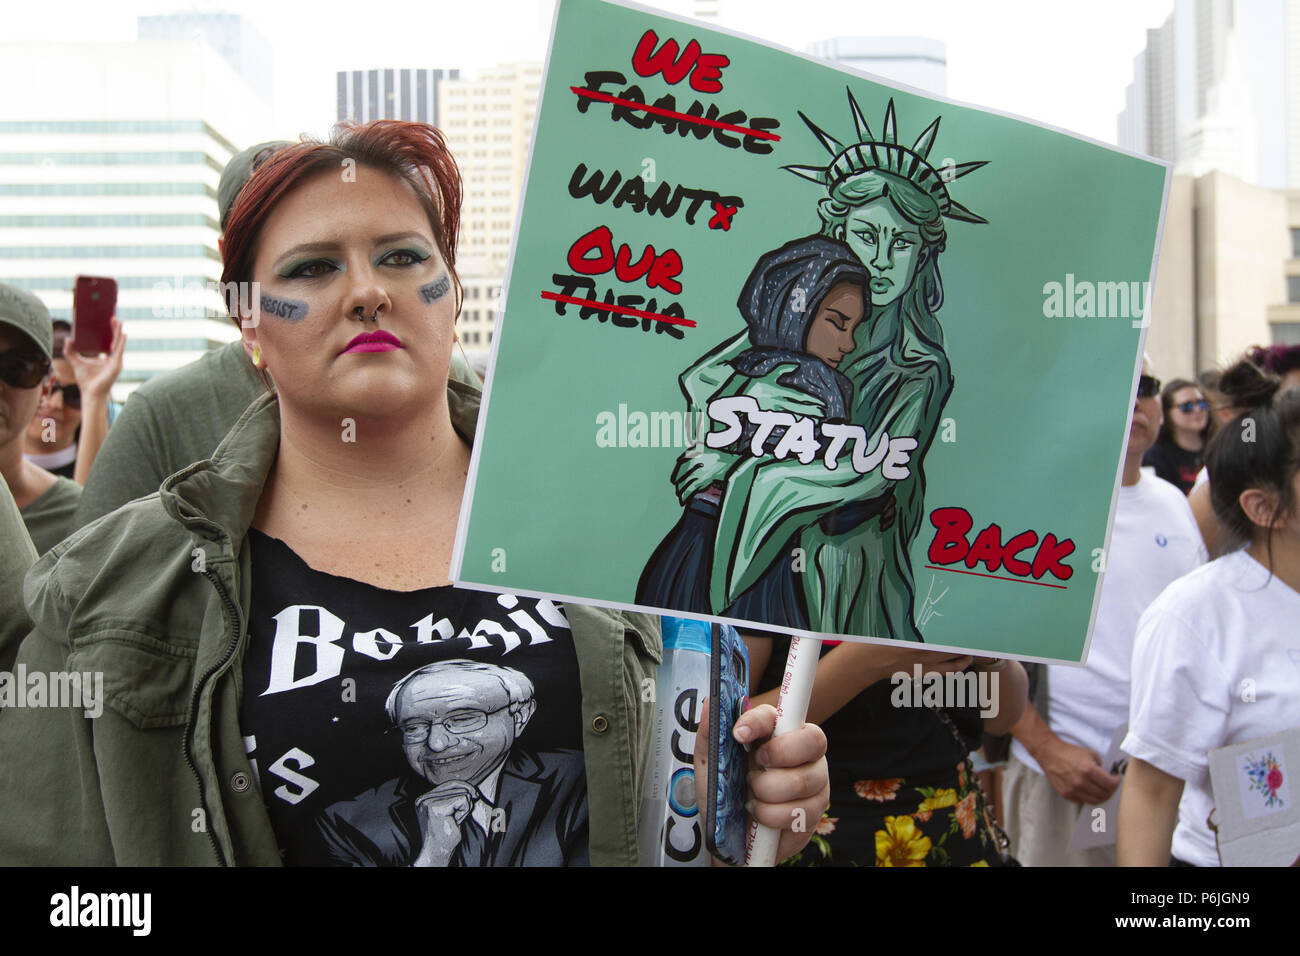 Dallas, Texas, USA. 30th June, 2018. A demonstrator listens to speakers in front of Dallas City Hall in downtown Dallas. People congregated to protest the Trump policy of separating immigrant children from their parents when they crosss the US/Mexico border seeking asylum in this country. Credit: Jaime R. Carrero/ZUMA Wire/Alamy Live News Stock Photo